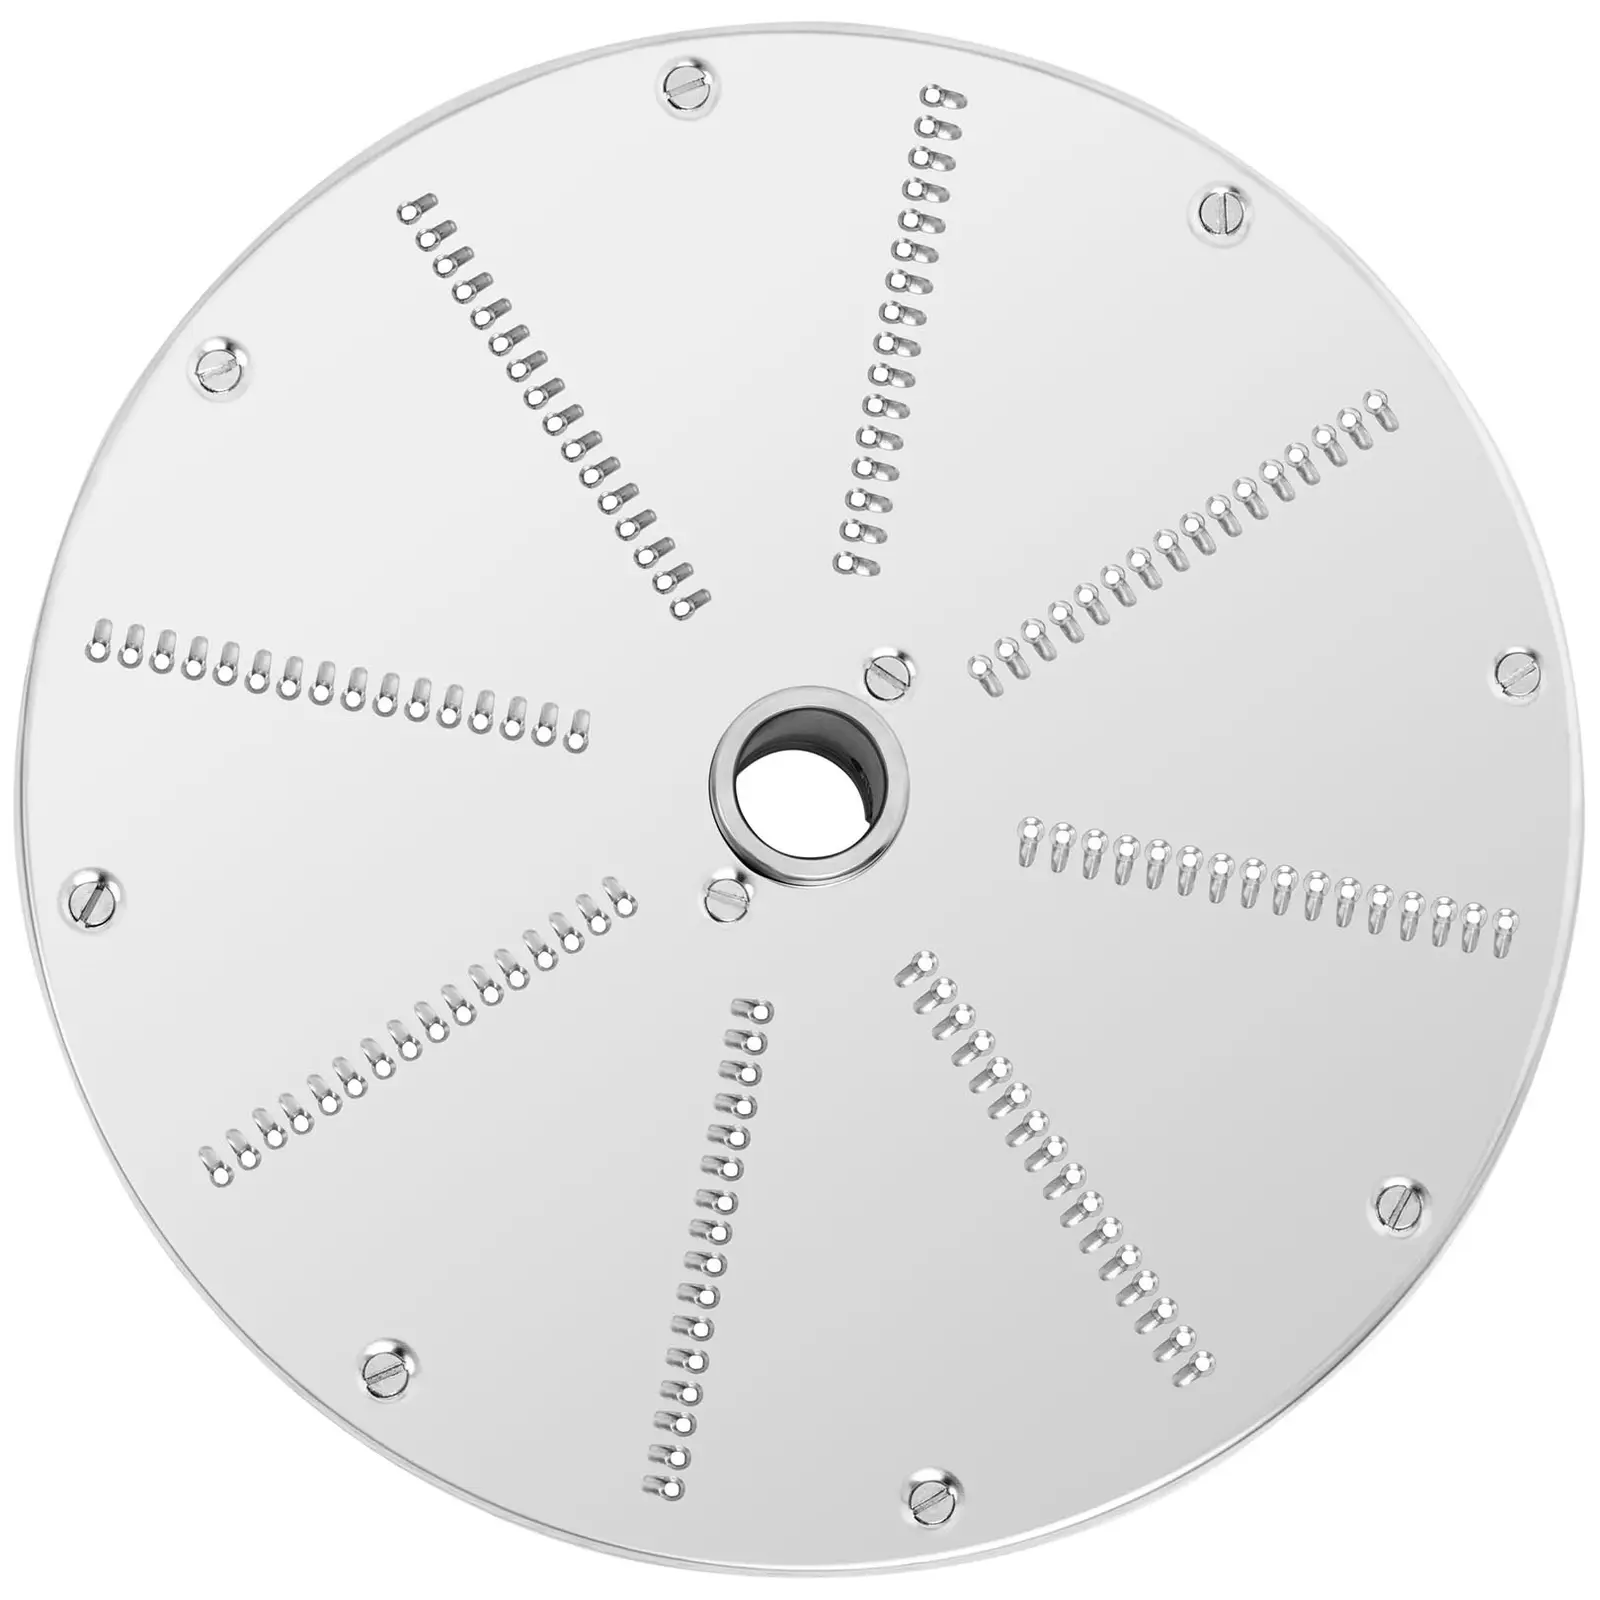 Shredding Disc - 205 mm - cut thickness 2 mm - stainless steel